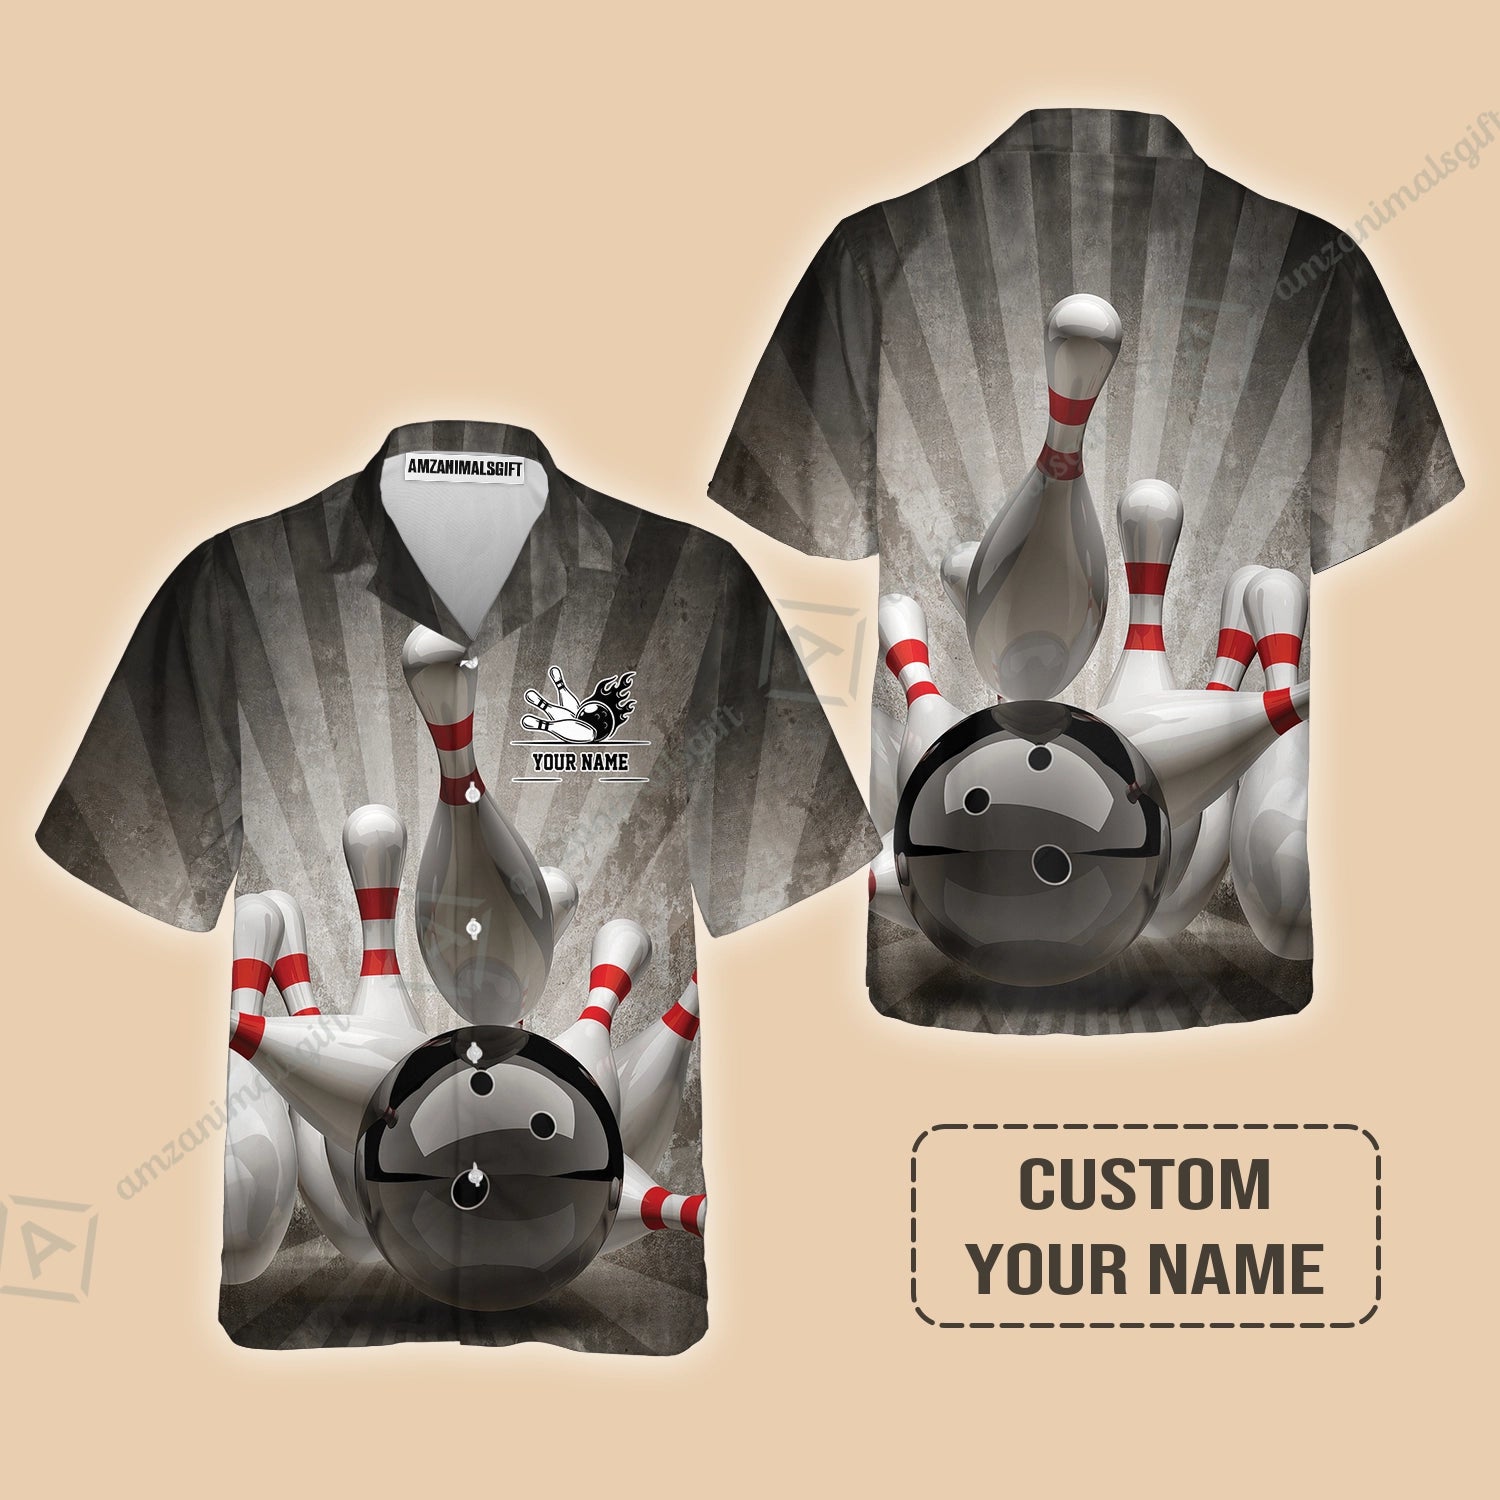 Customized Name Bowling Hawaiian Shirt, Bowling Apparel For Men And Women, Bowling Team - Perfect Outfit For Bowling Lovers, Bowlers